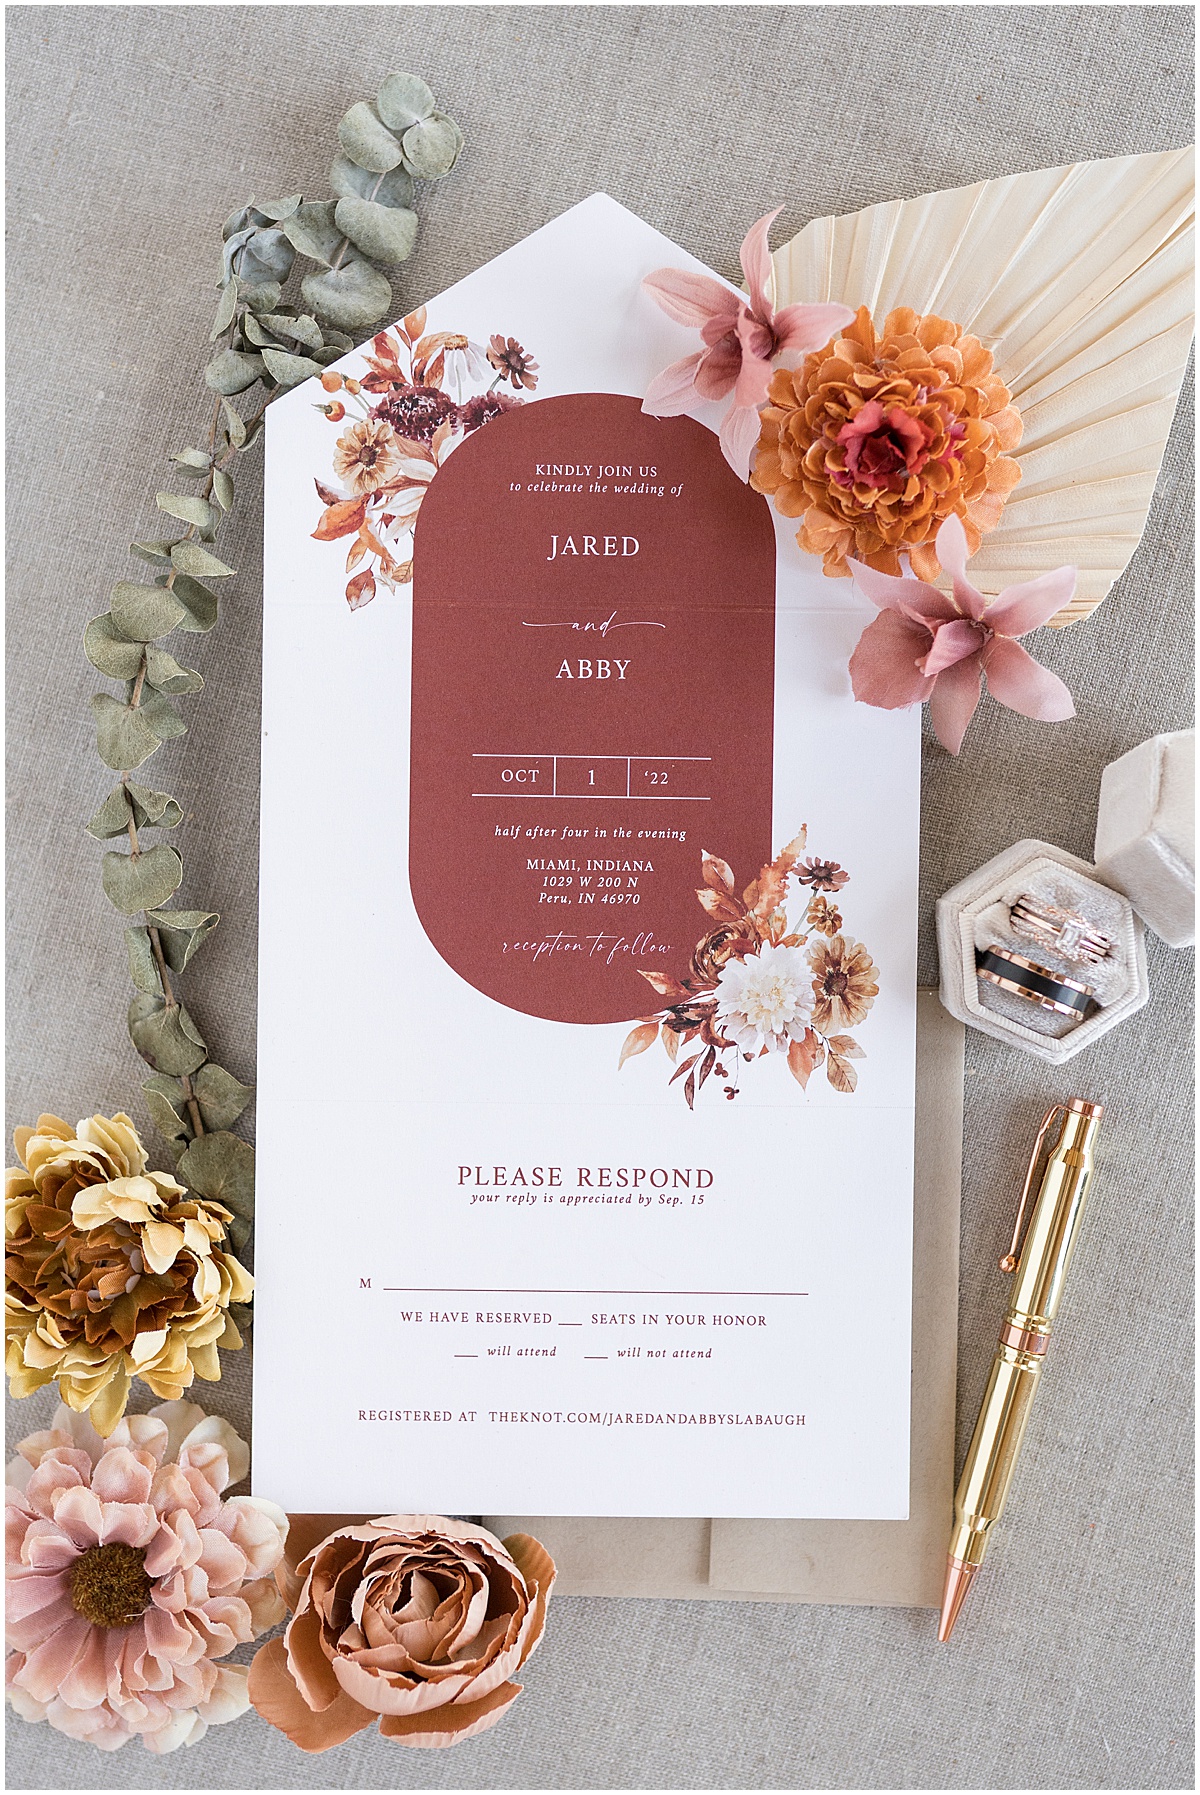 Bridal details of invitation for Miami County Fairgrounds wedding in Peru, Indiana